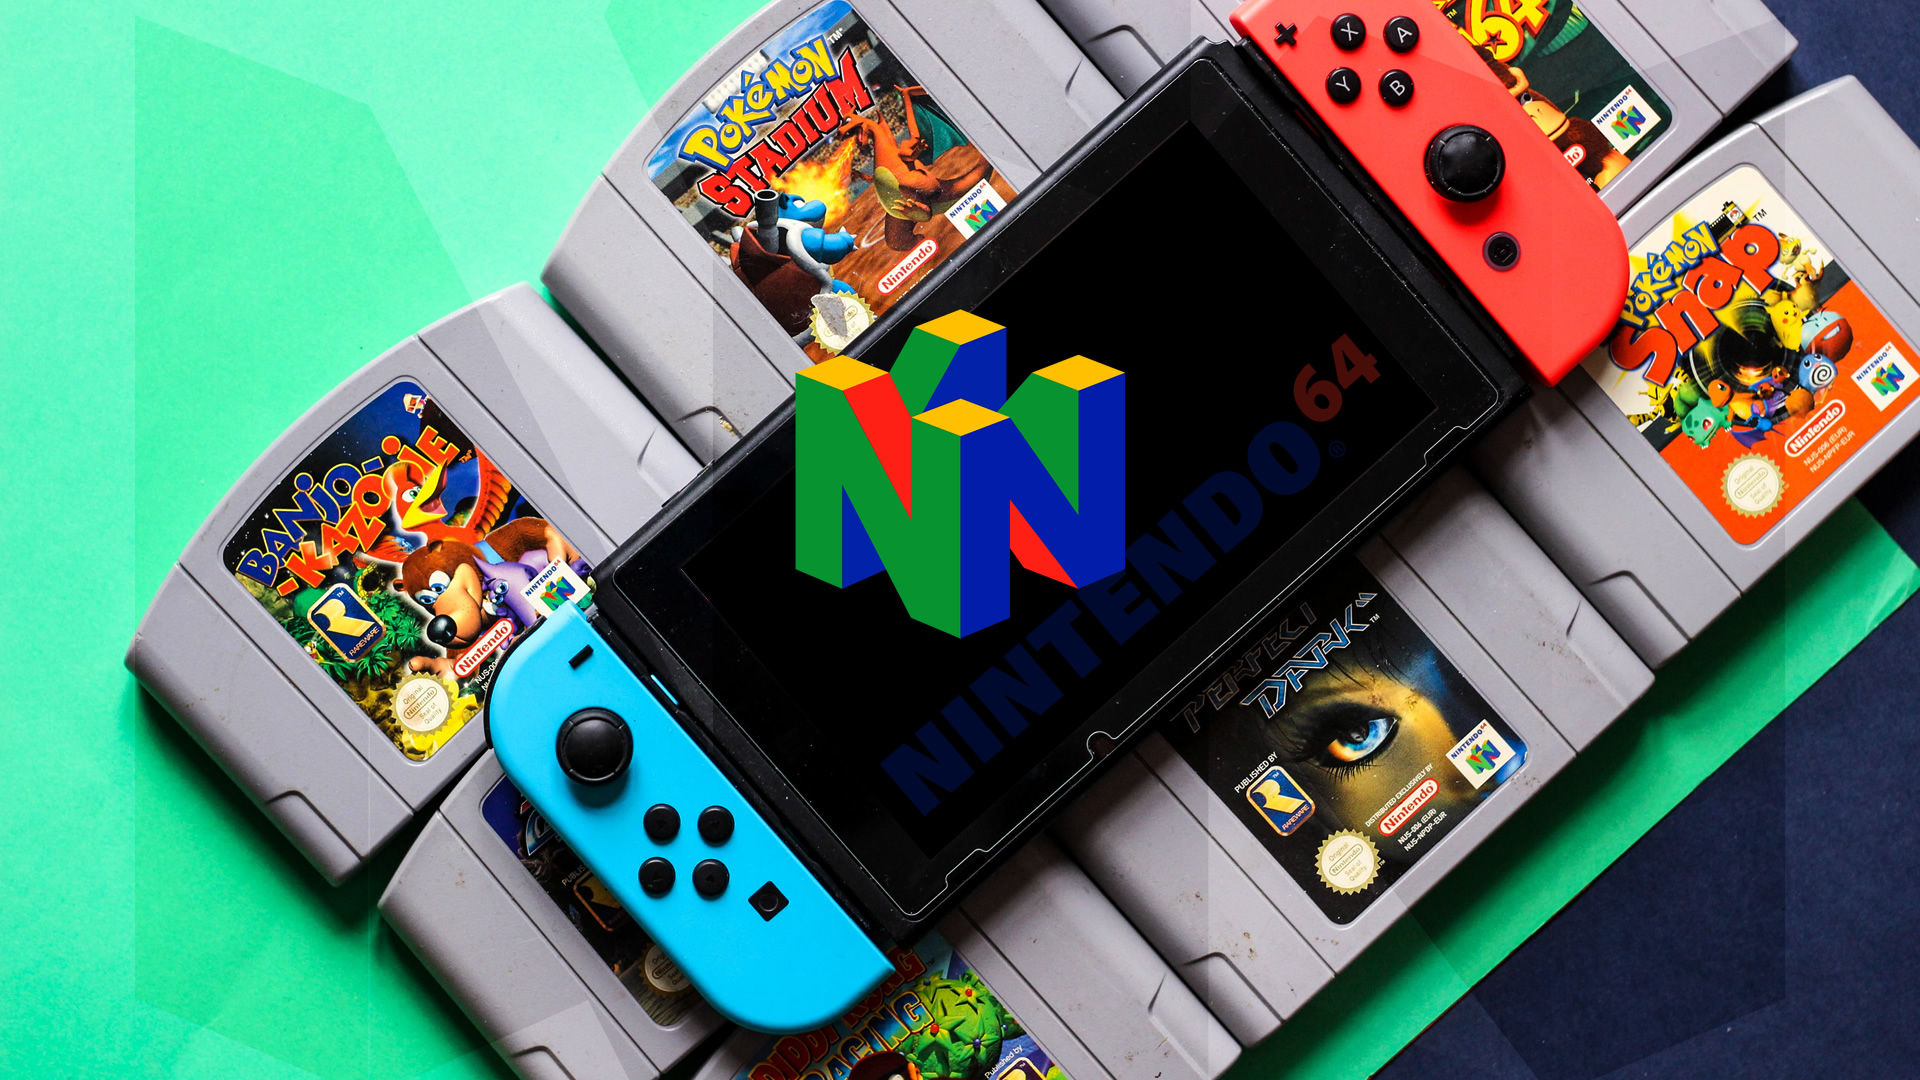 is n64 coming to switch